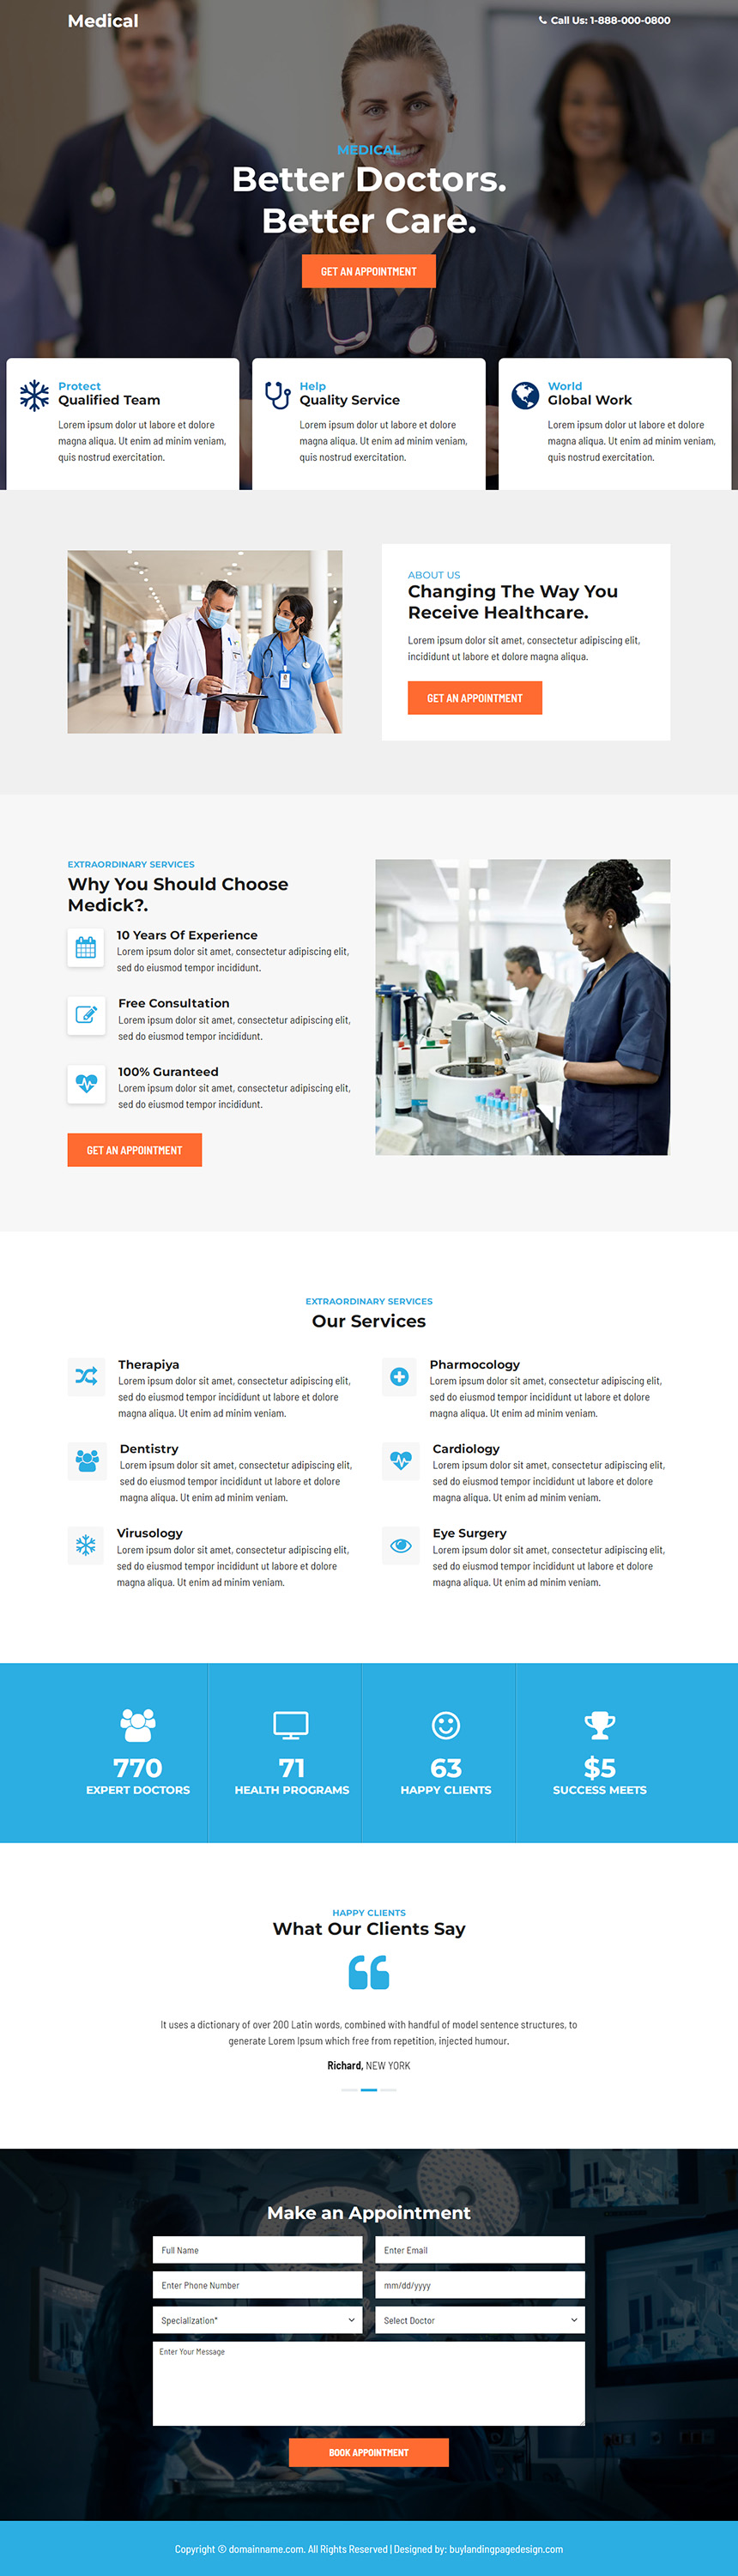 medical service appointment booking responsive landing page